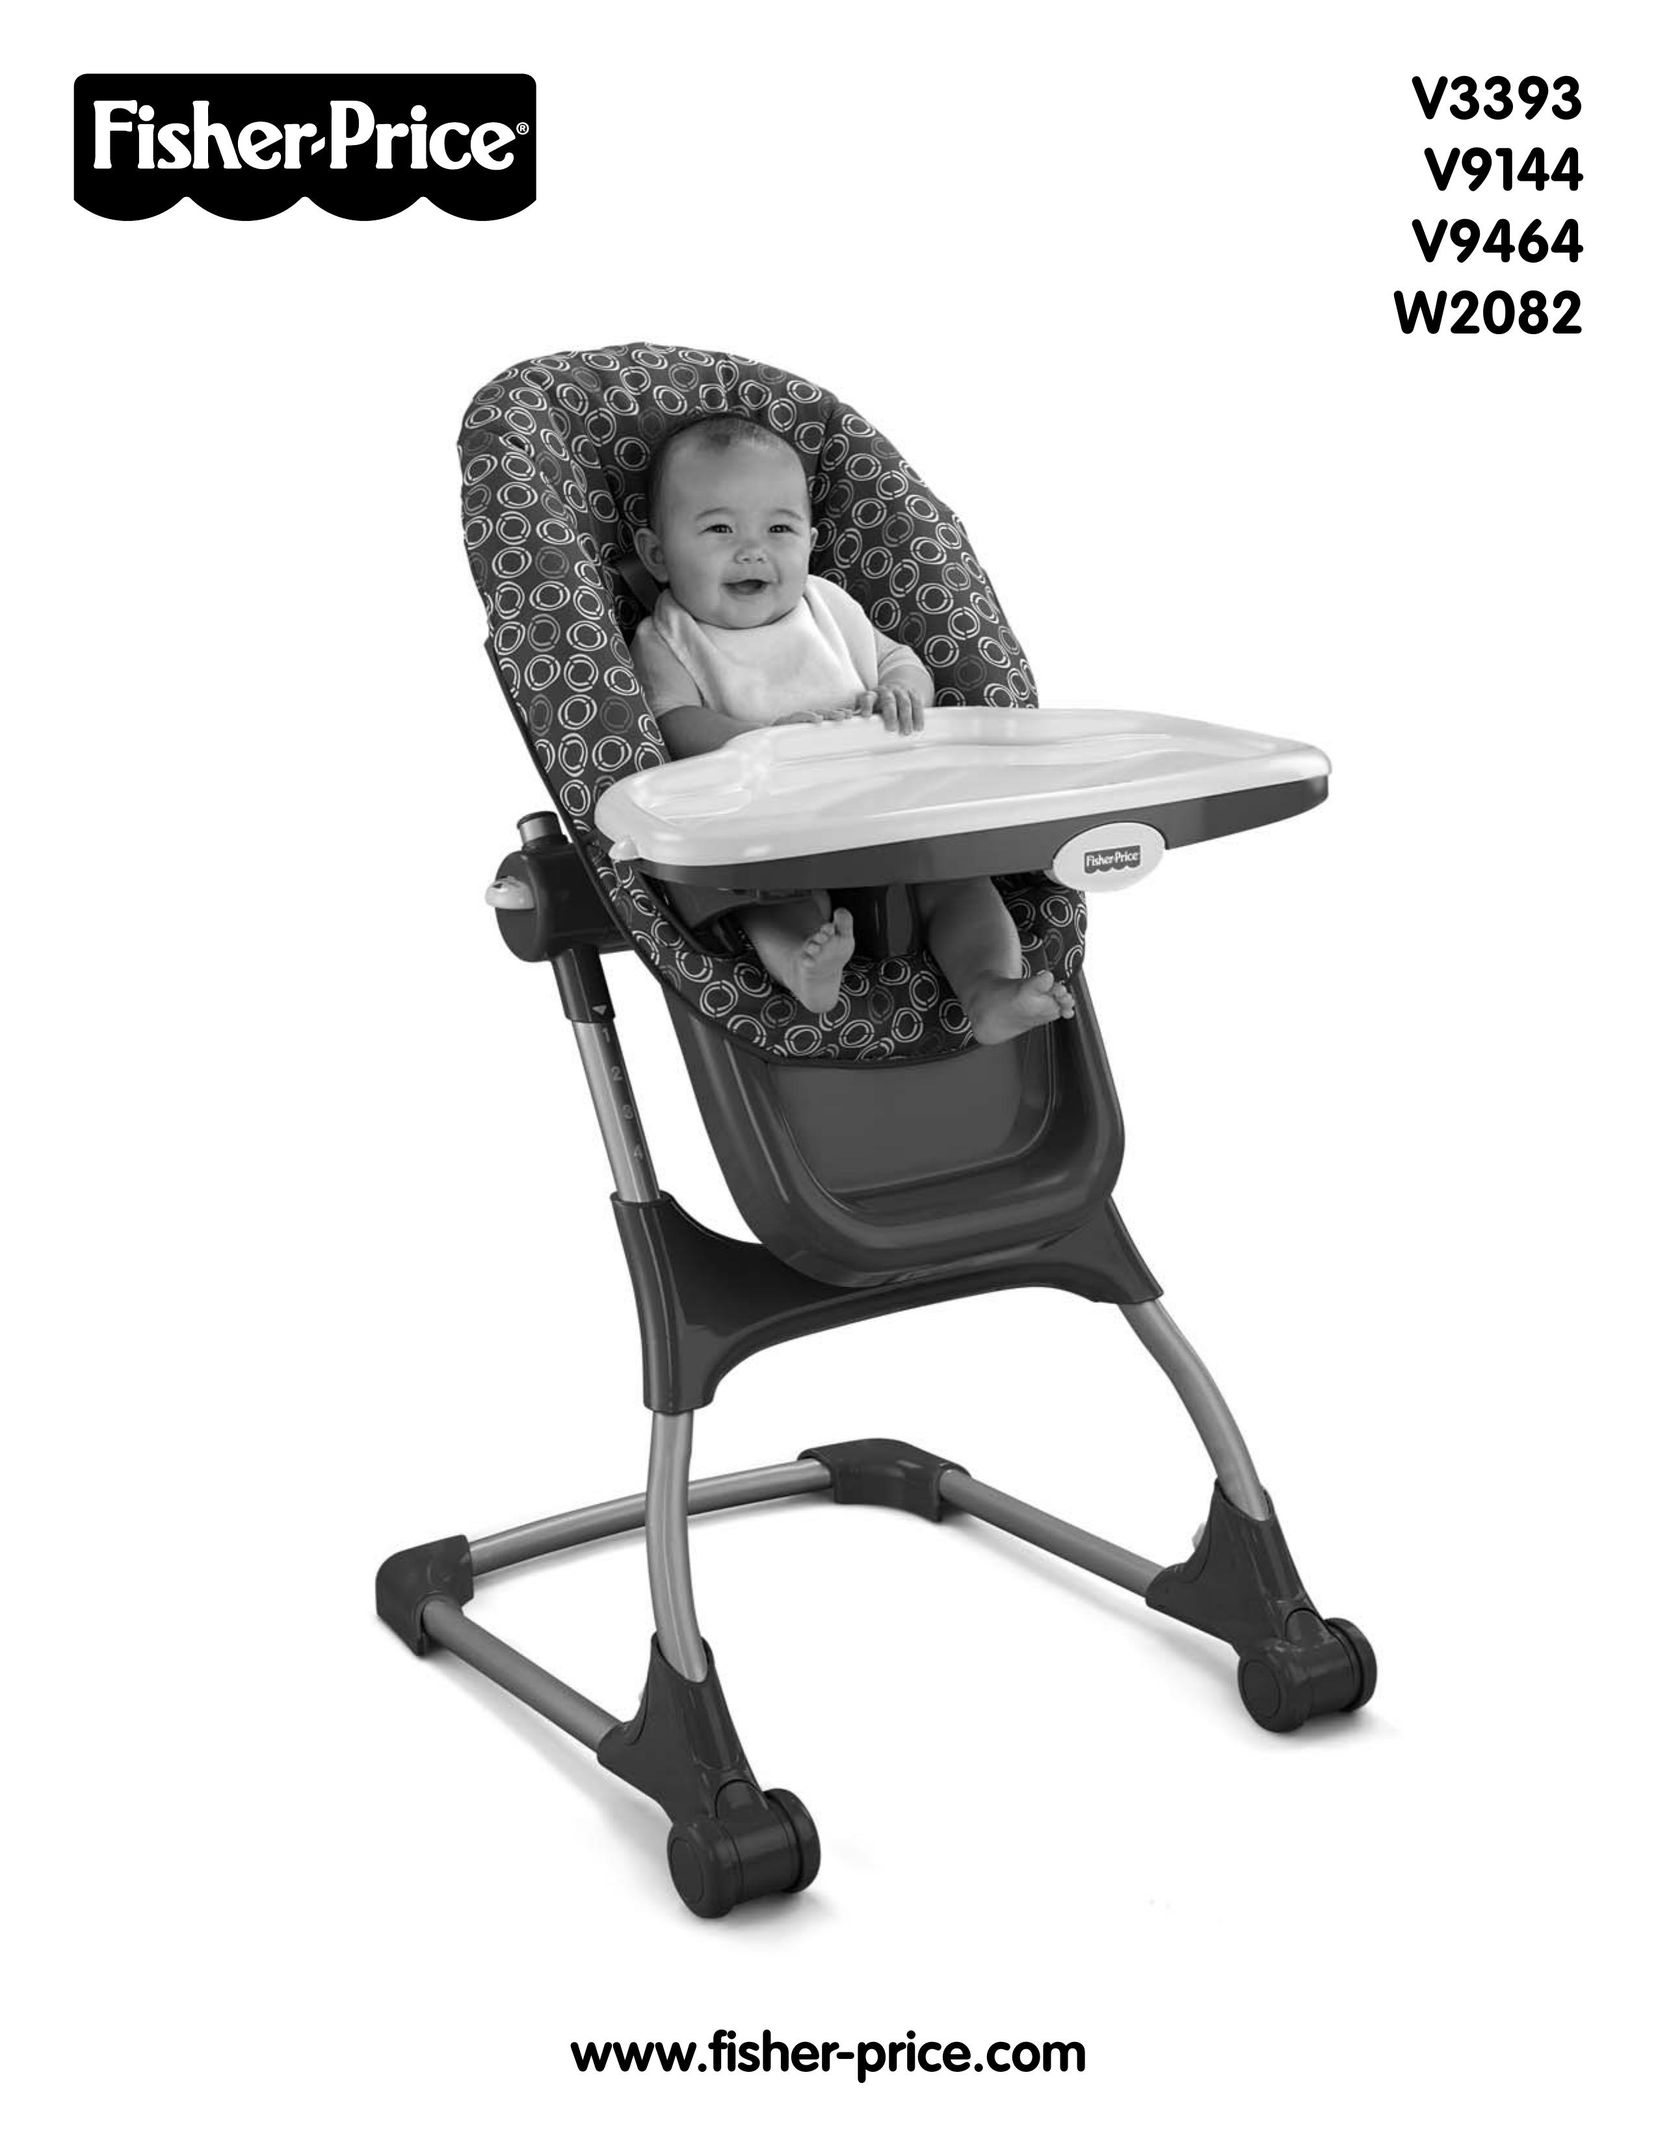 Fisher-Price V3393 High Chair User Manual